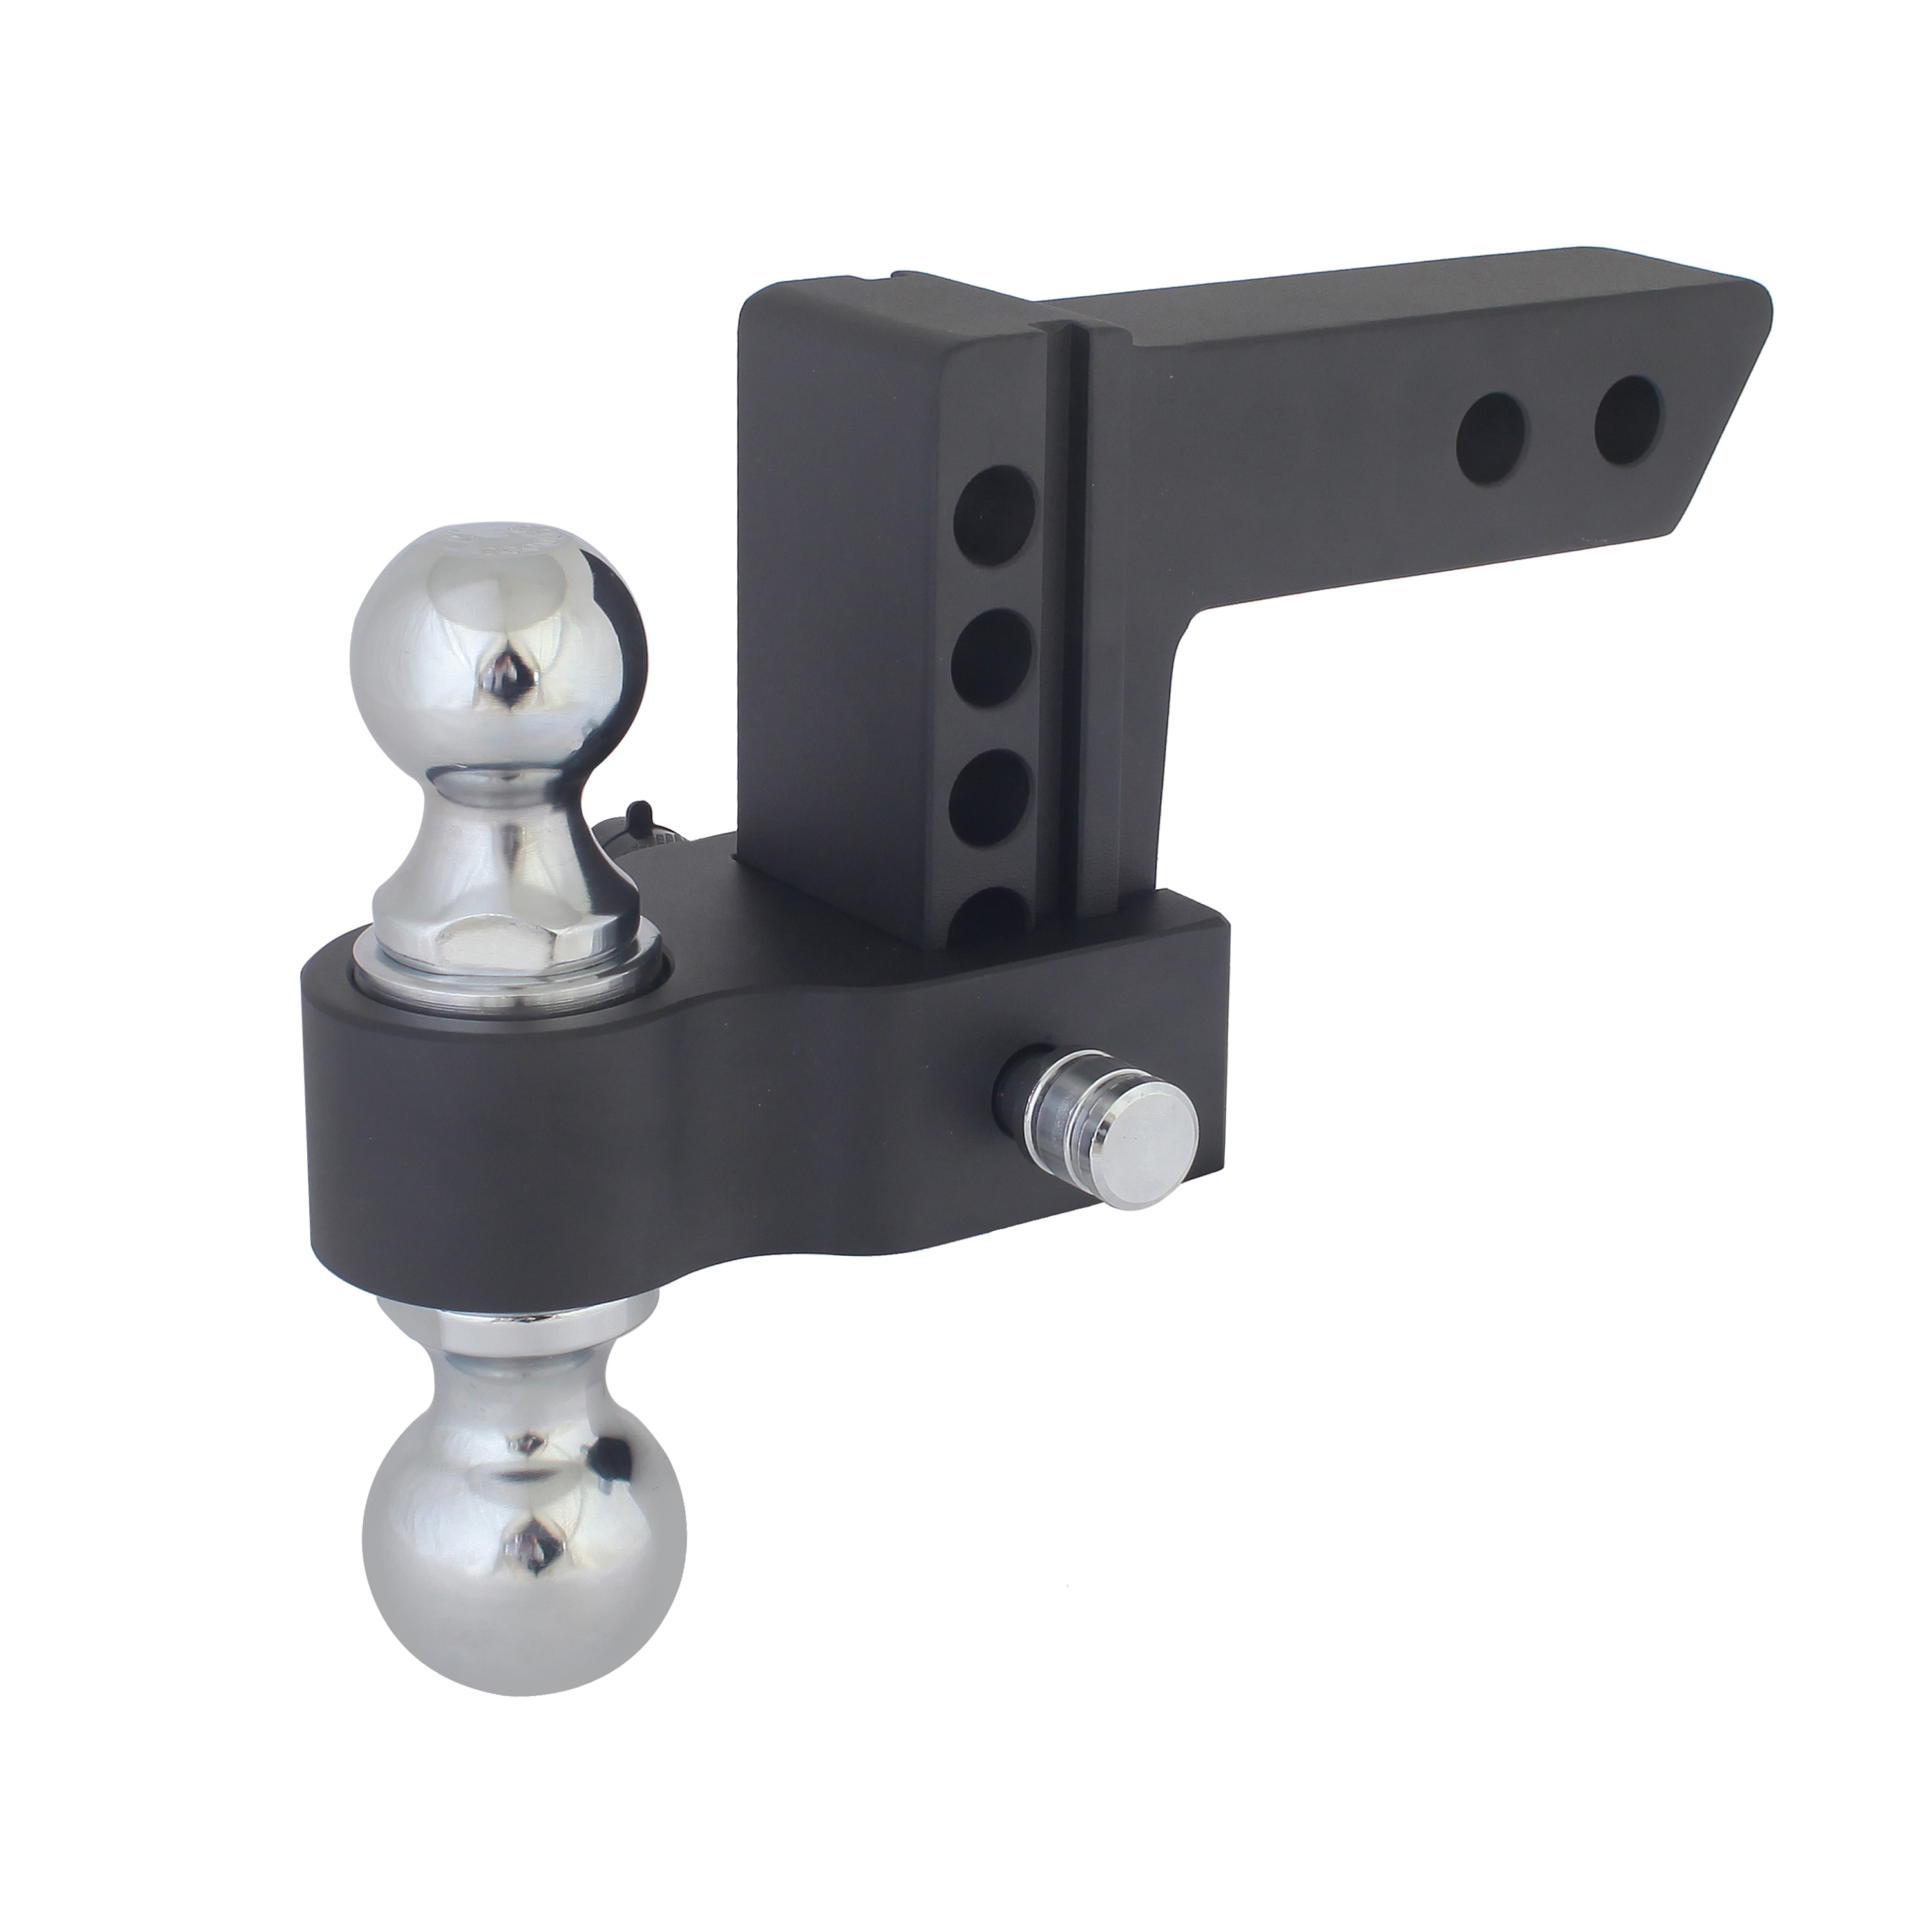 Adjustable Trailer 10" Drop Hitch Ball Mount 2" Receiver With 2-5/16" hitch ball 